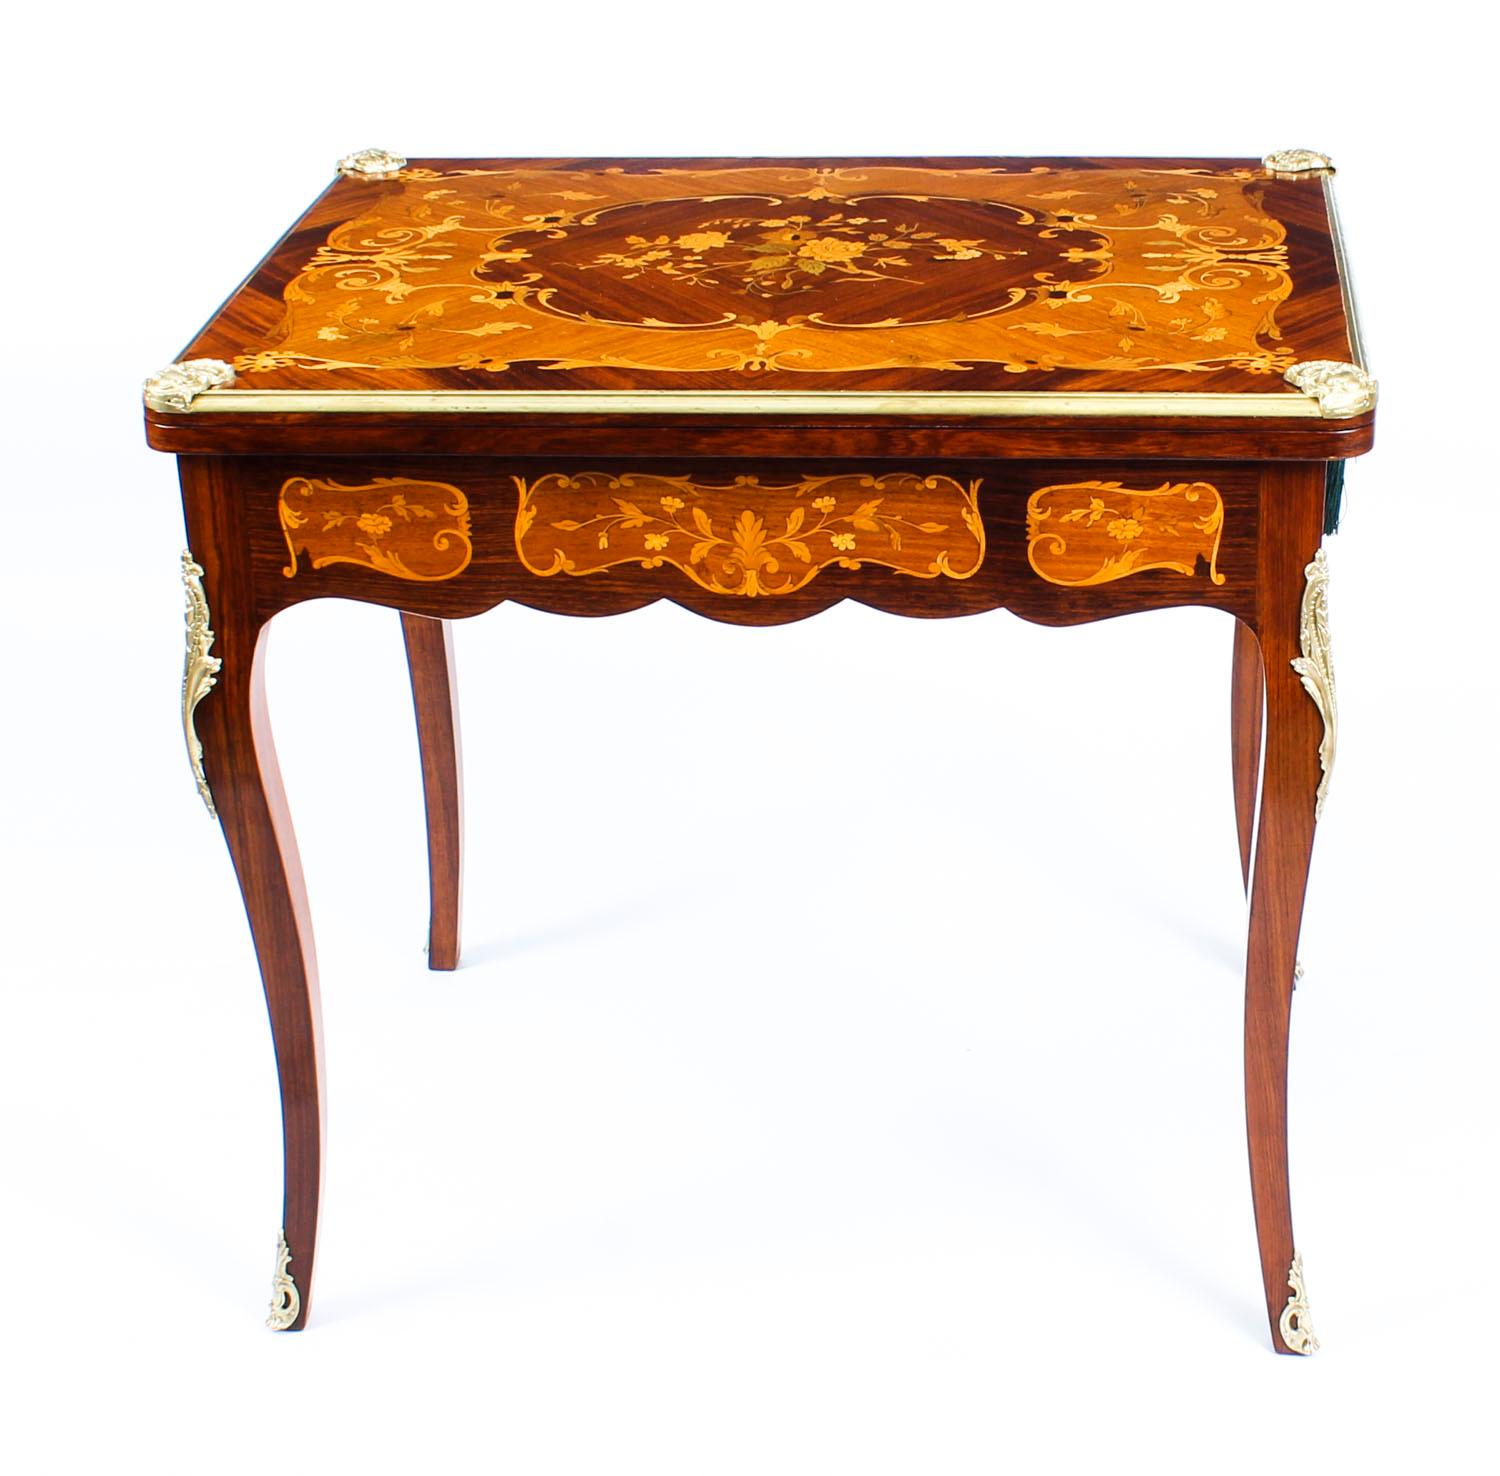 A truly fabulous antique French marquetry turnover top games table, circa 1880 in date.

The top with ormolu banded edge, the floral marquetry decoration exhibits a stunning array of exotic woods to include walnut, satinwood, and tulipwood.

The